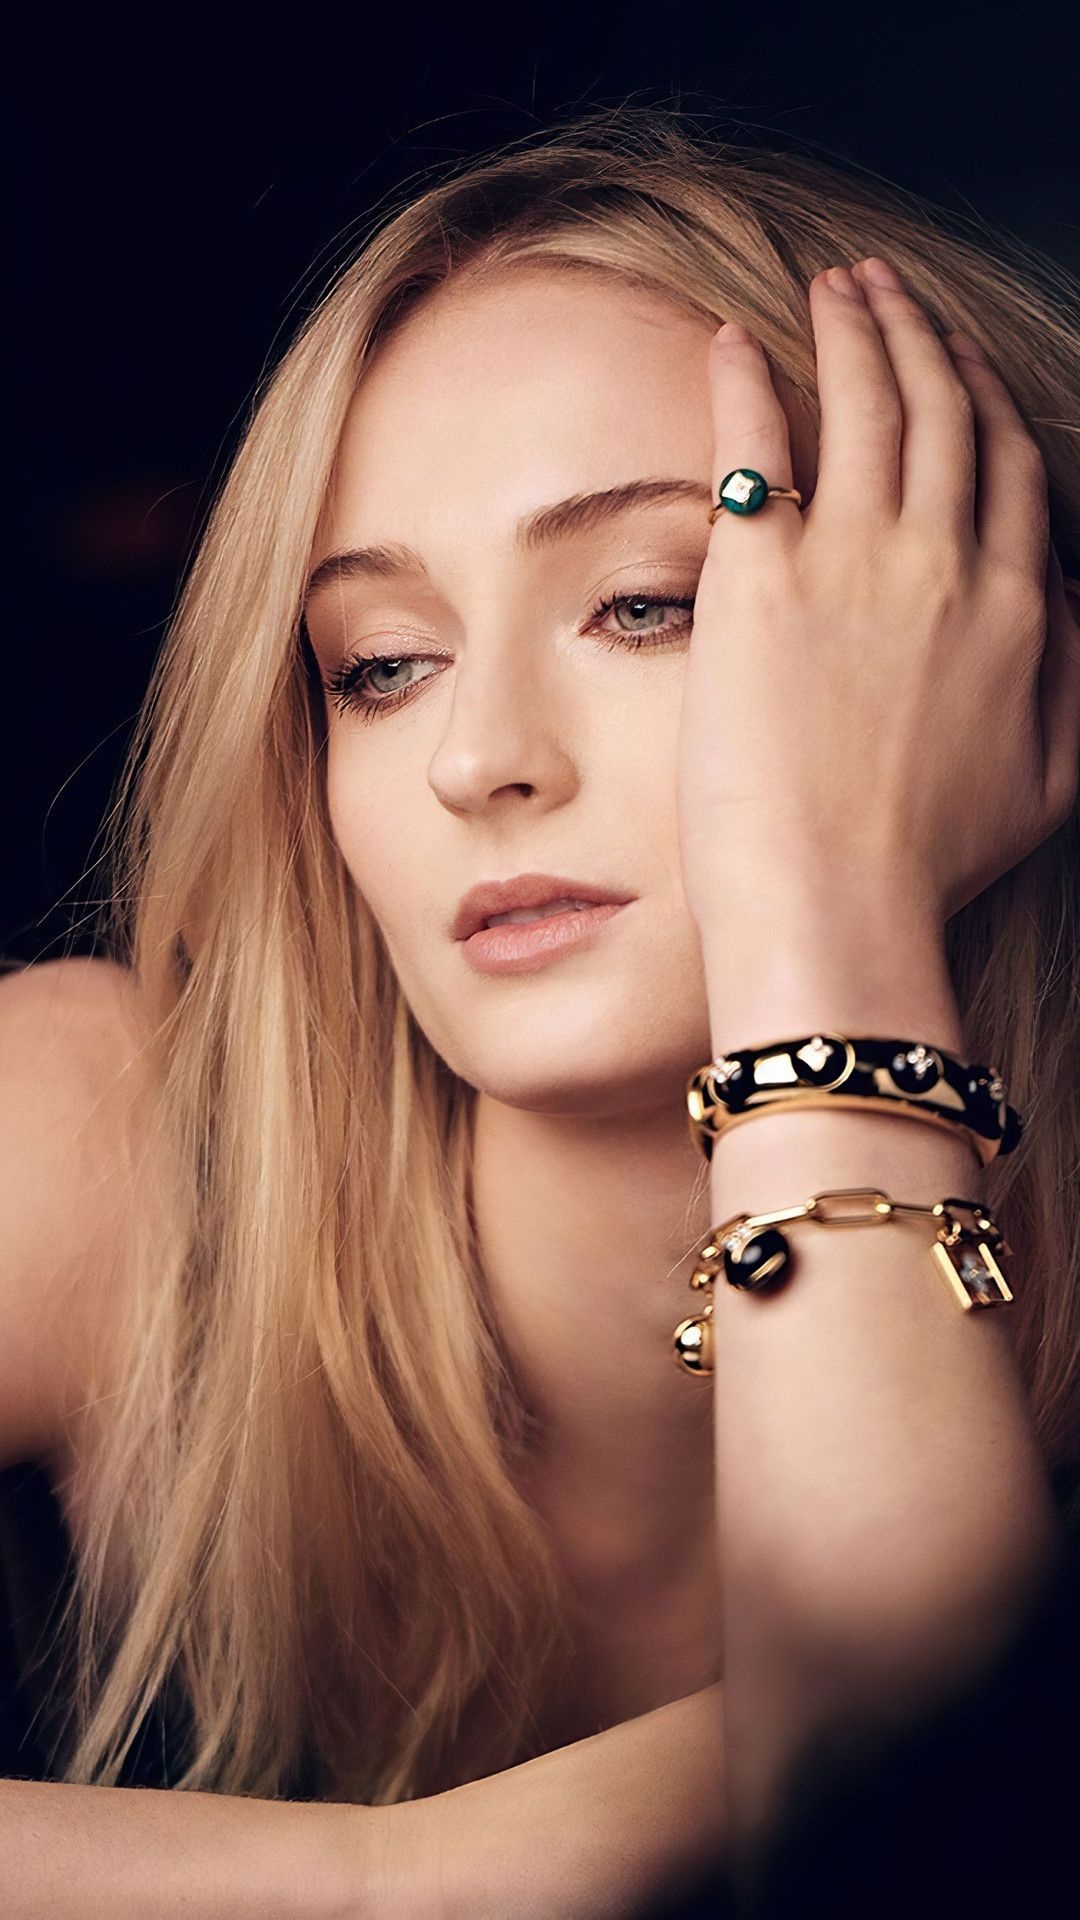 Sophie Turner wallpapers, Celebrities, Phone backgrounds, 1080x1920 Full HD Handy